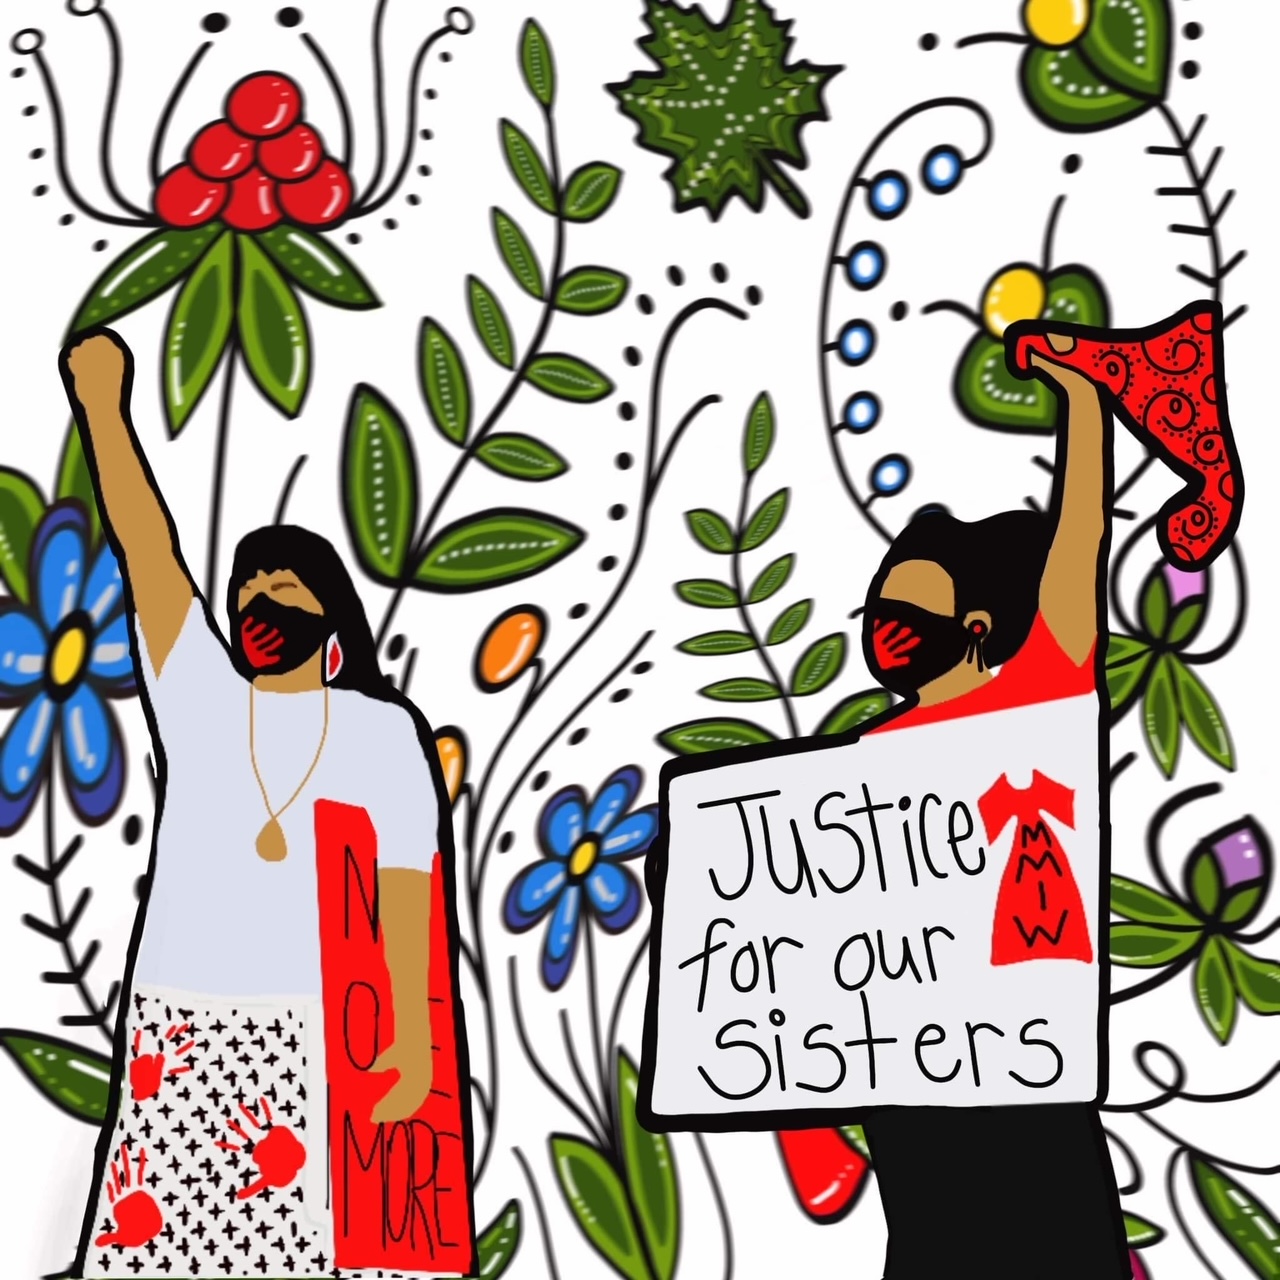 two indigenous person holding signs that say "Justice for our Sisters"